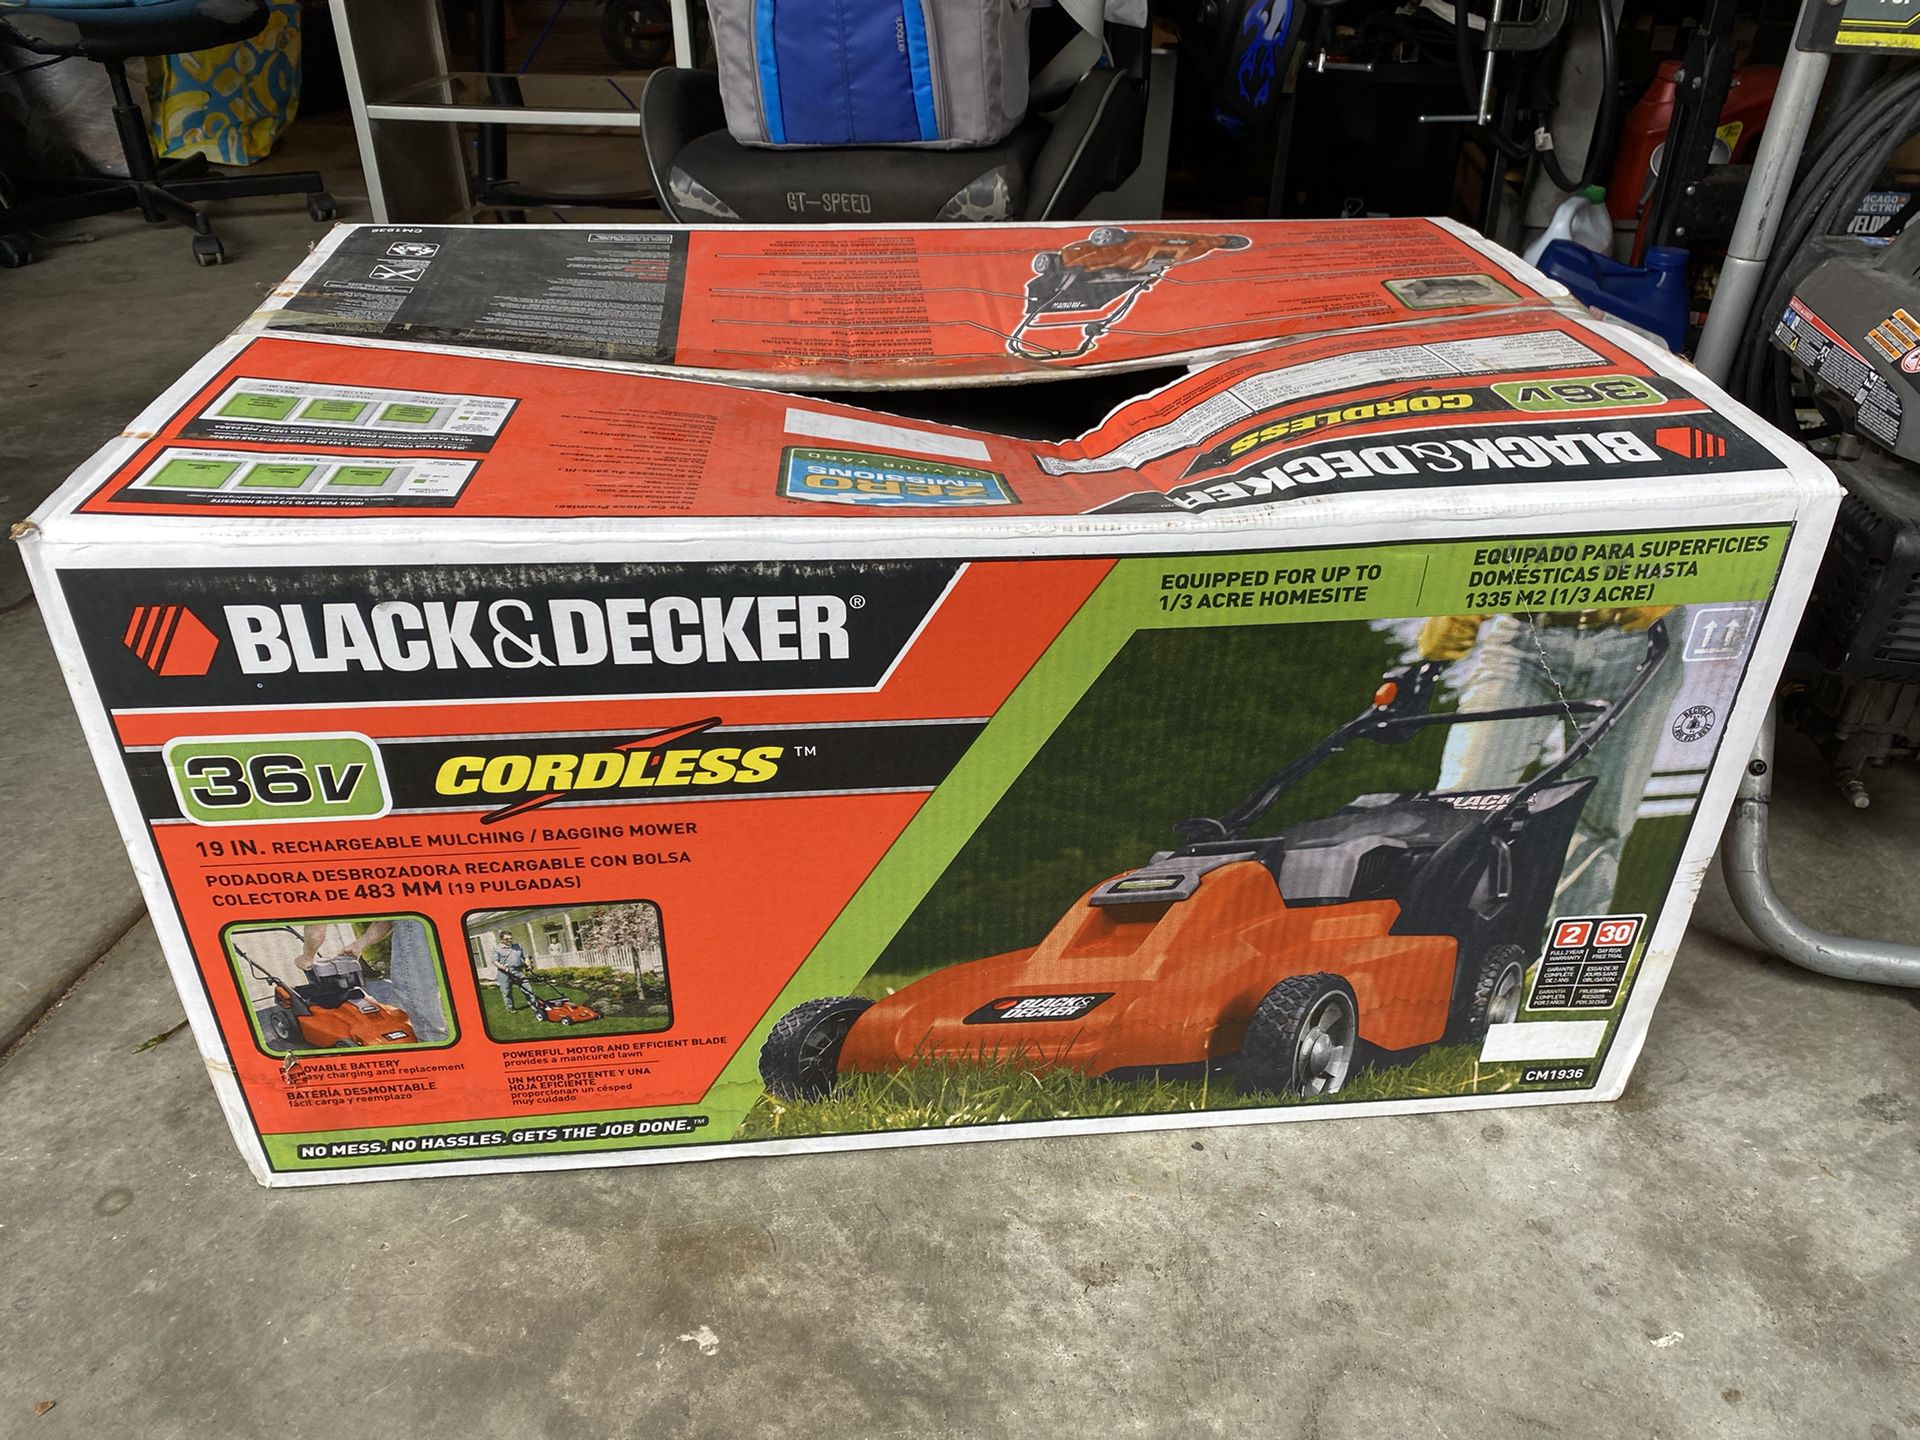 Black & Decker CM1936 19-Inch 36-Volt Cordless Electric Lawn Mower With  Removable Battery